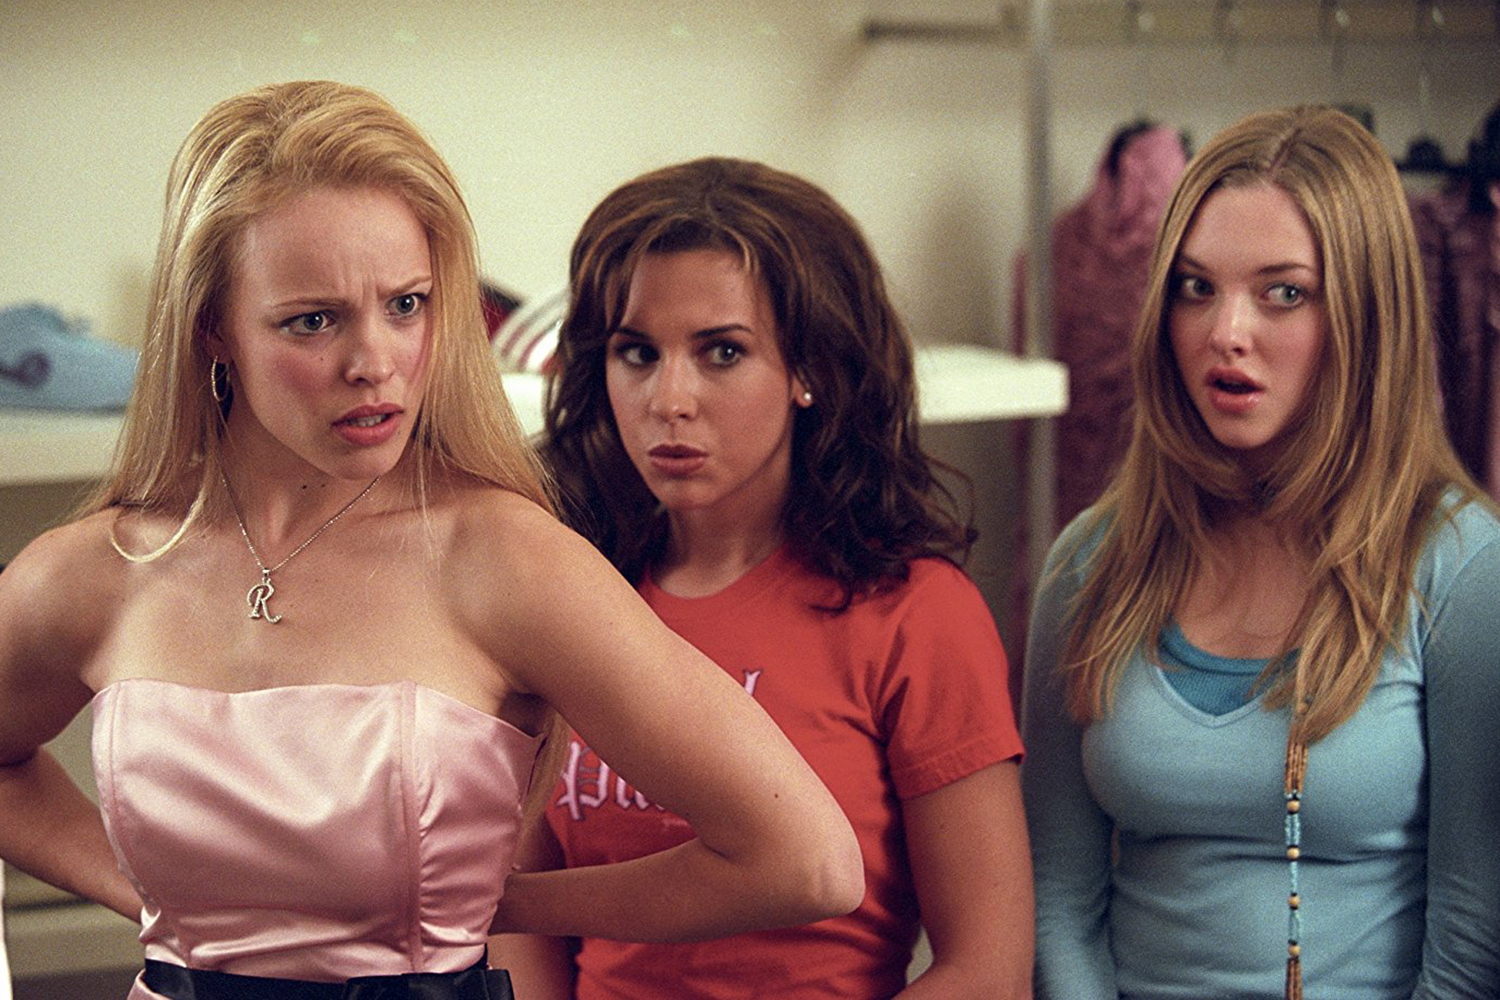 Stop Everything: A Never-Before-Seen ‘Mean Girls’ Scene Has Surfaced